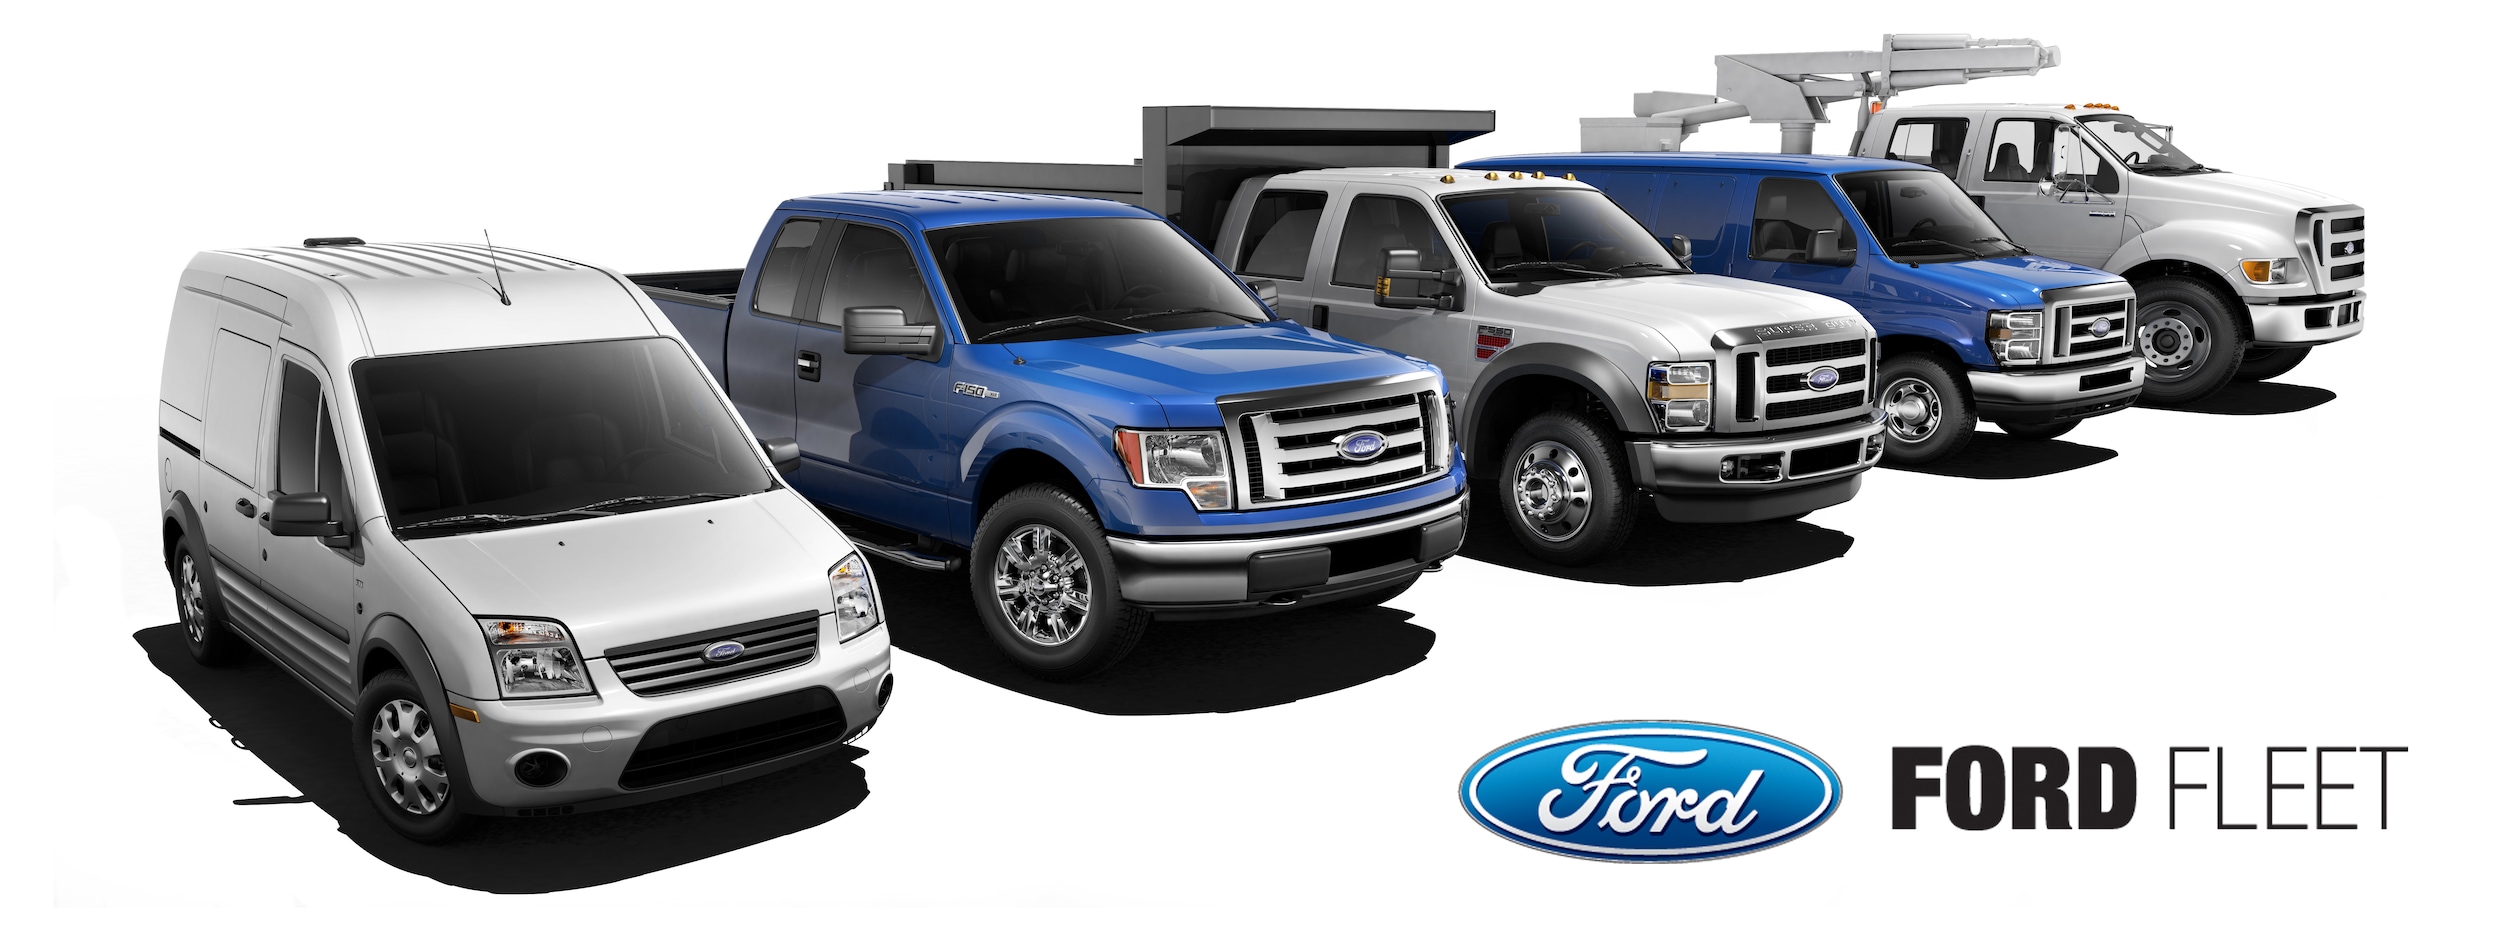 Ford commercial fleet vehicles #4